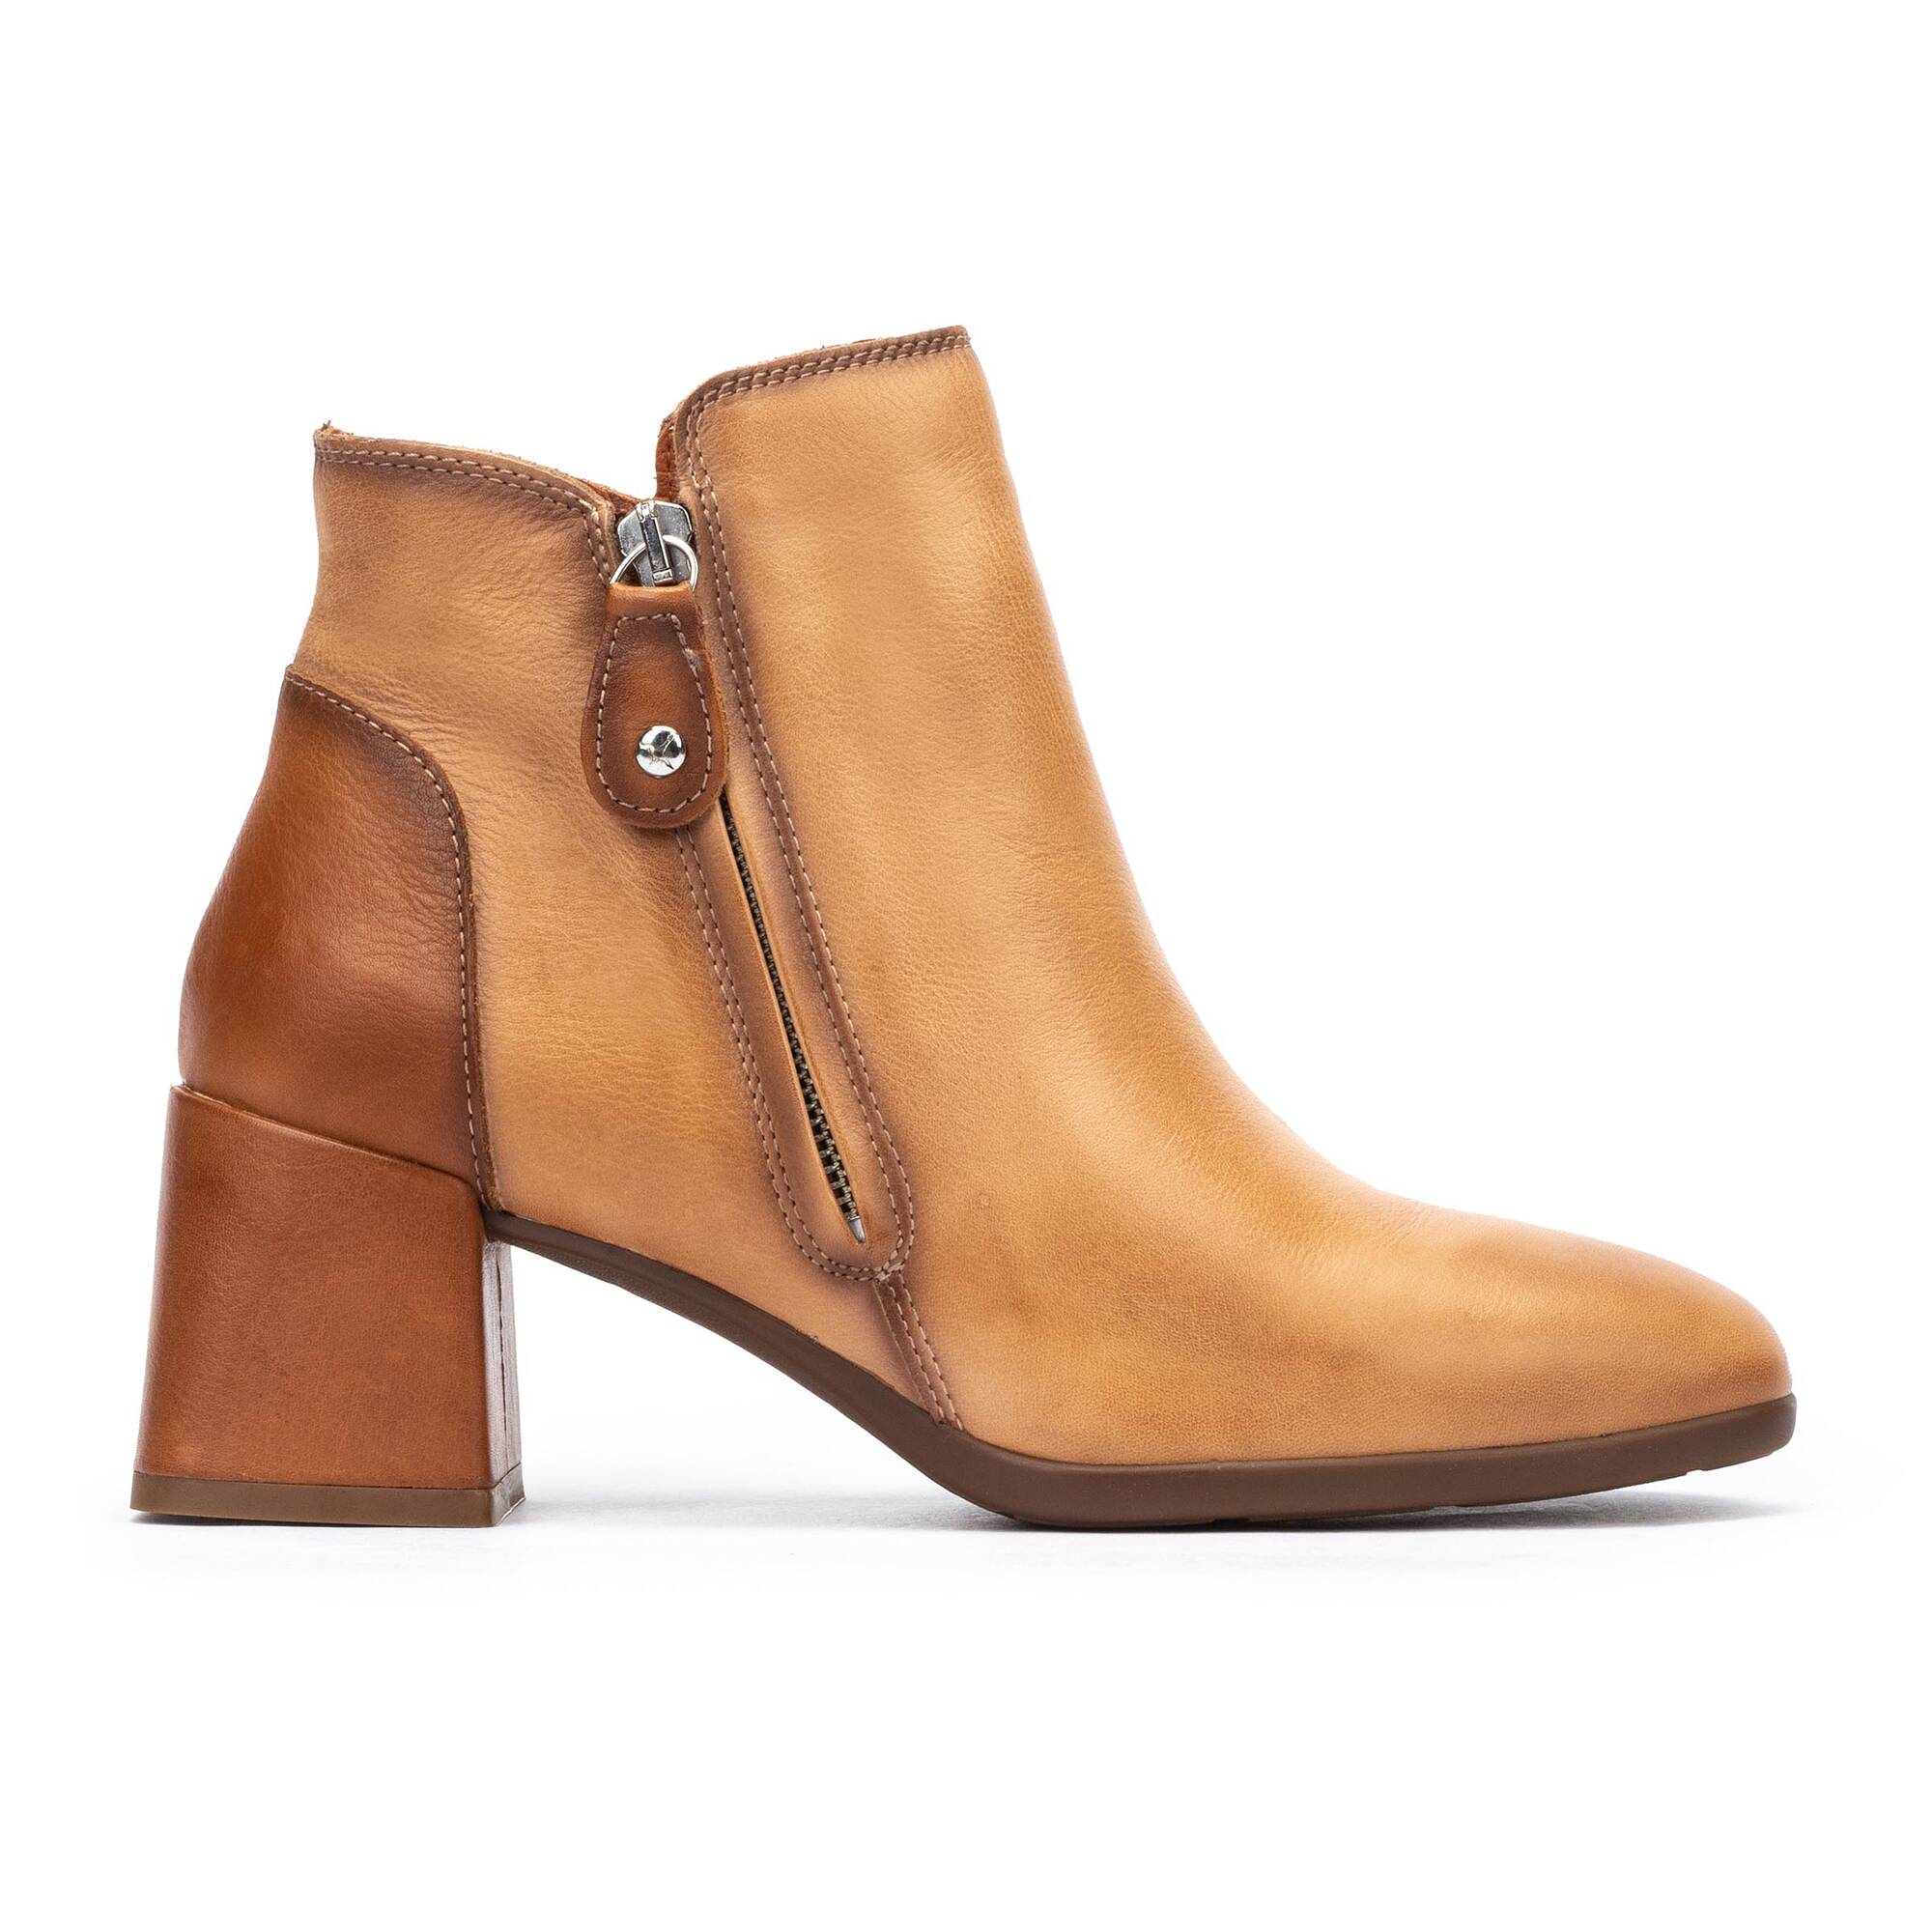 Ankle boots | SEVILLA W1W-8816C1, ALMOND, large image number 10 | null